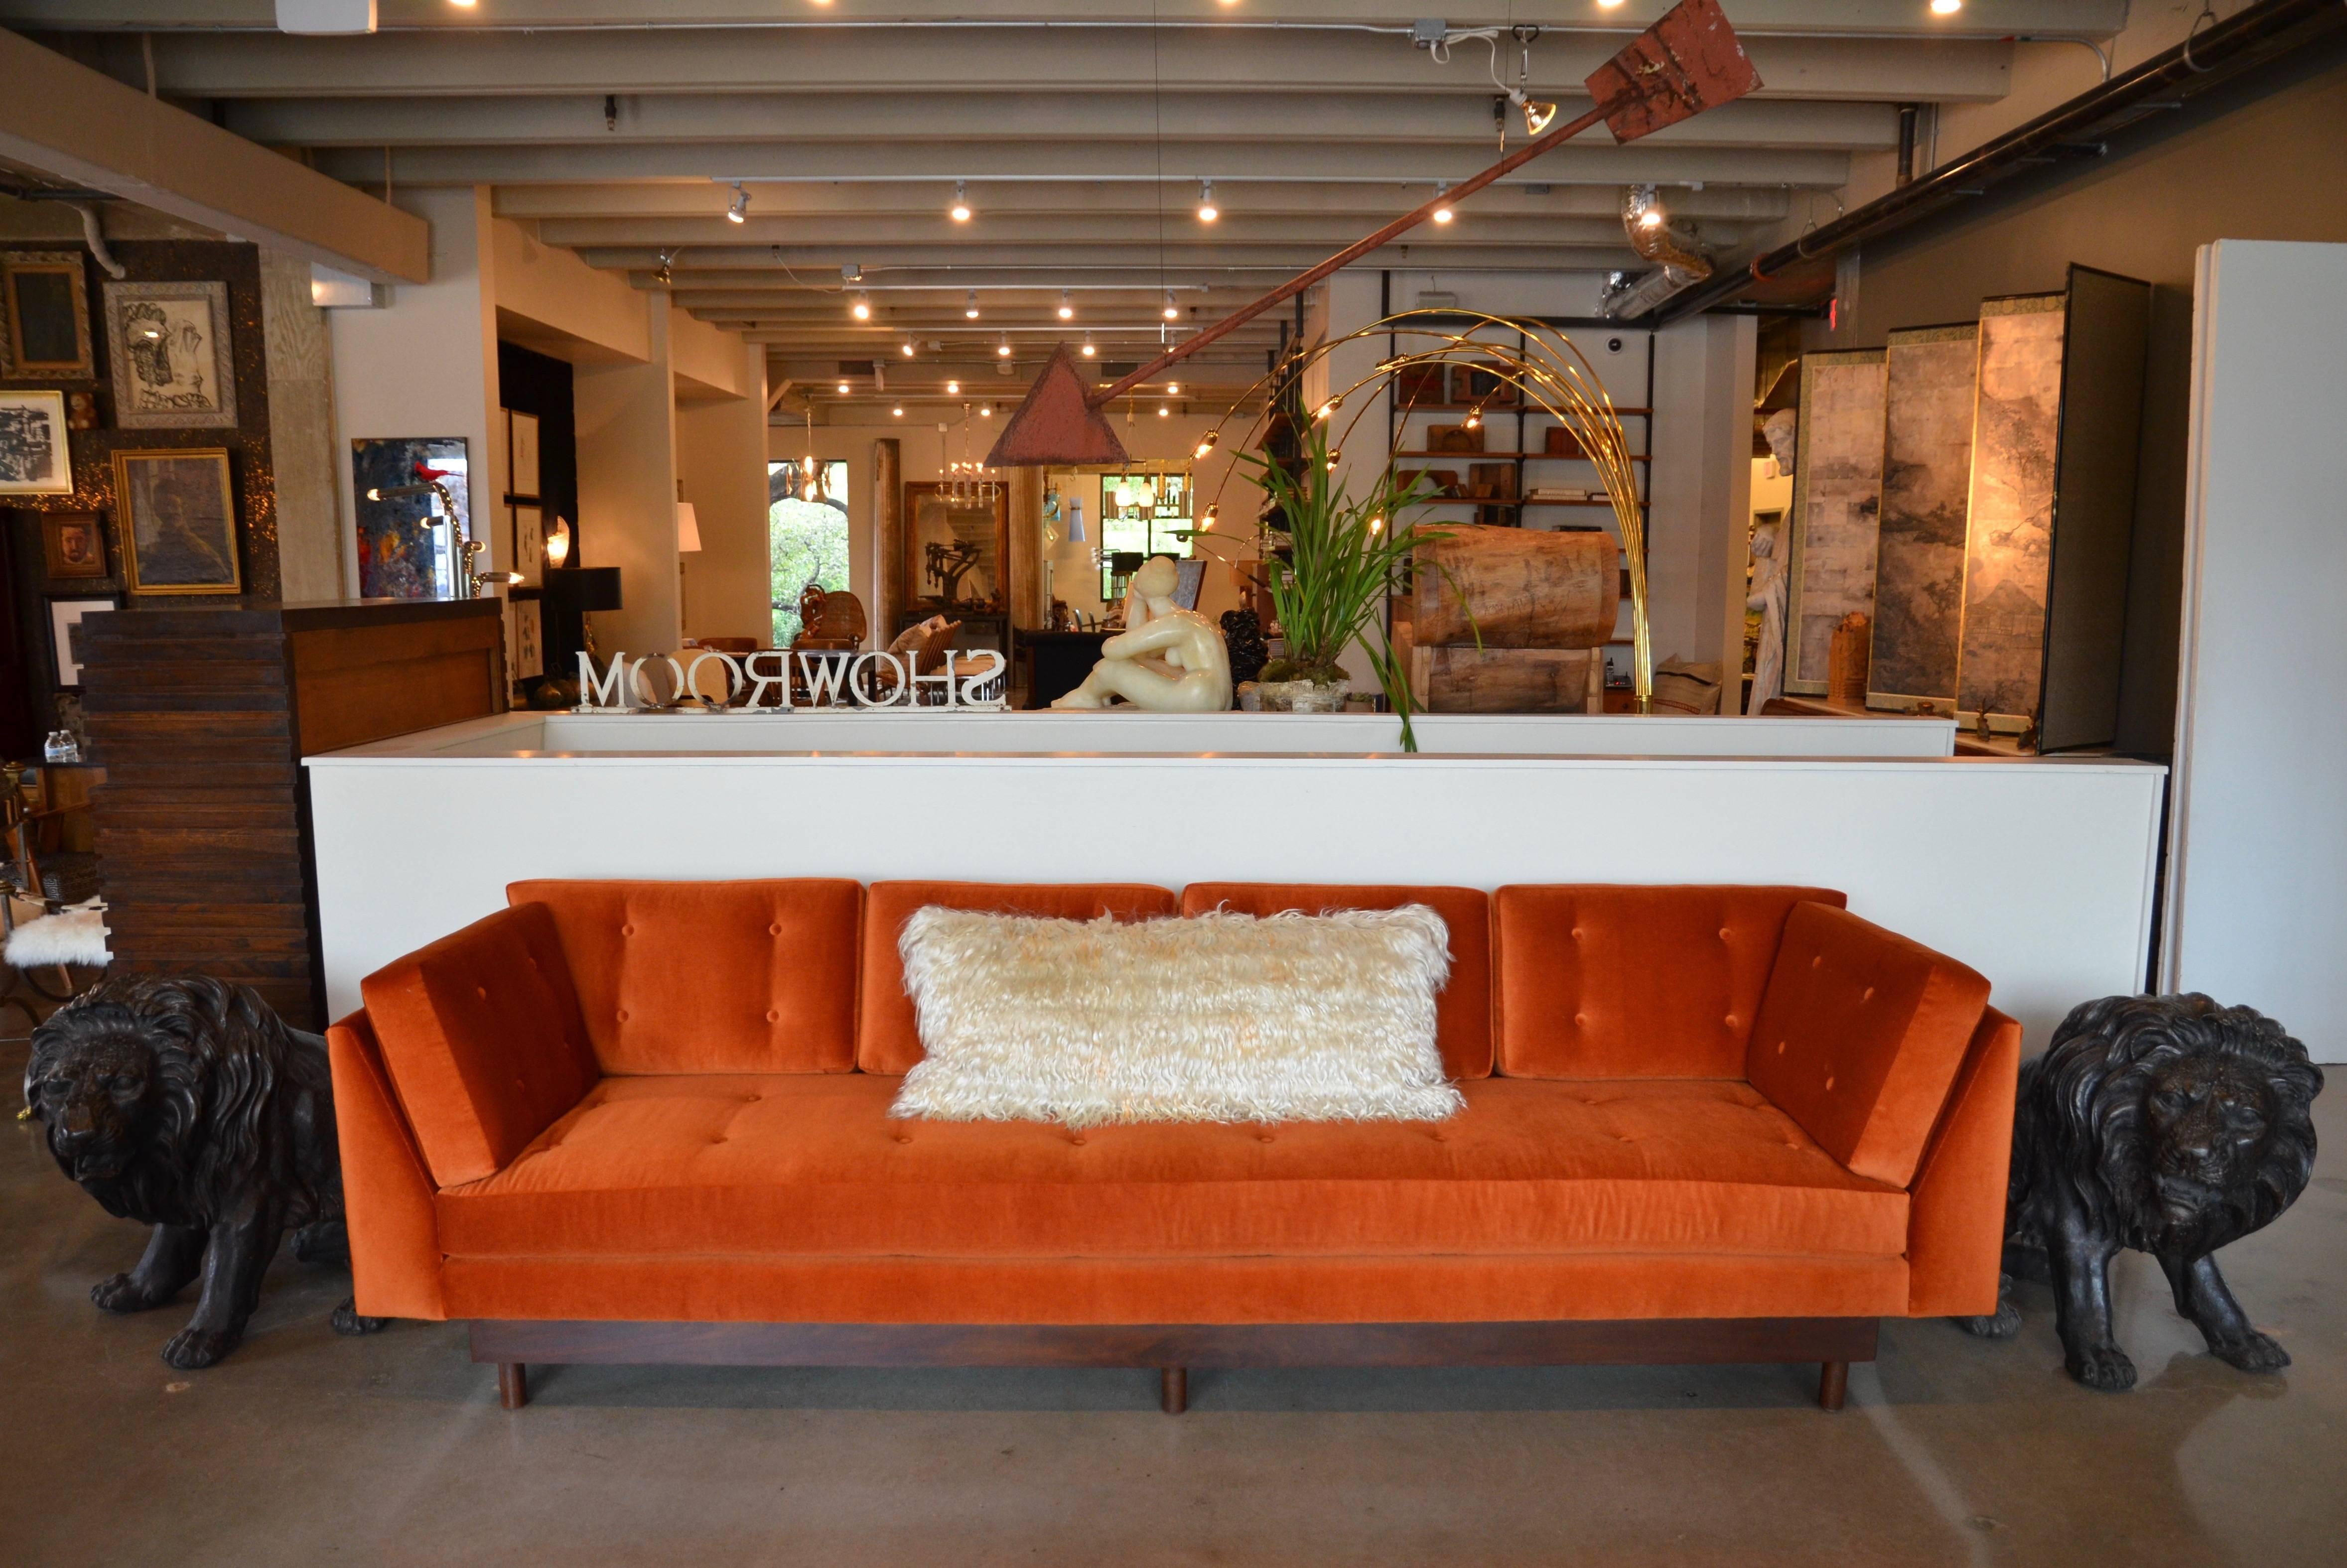 This sofa is a statement piece at 111",  but is also well structured, comfortable, and has Classic Mid-Century details in the style Edward Wormley and Adrian Pearsall. Newly reupholstered in high grade mohair for luxury and durability. One